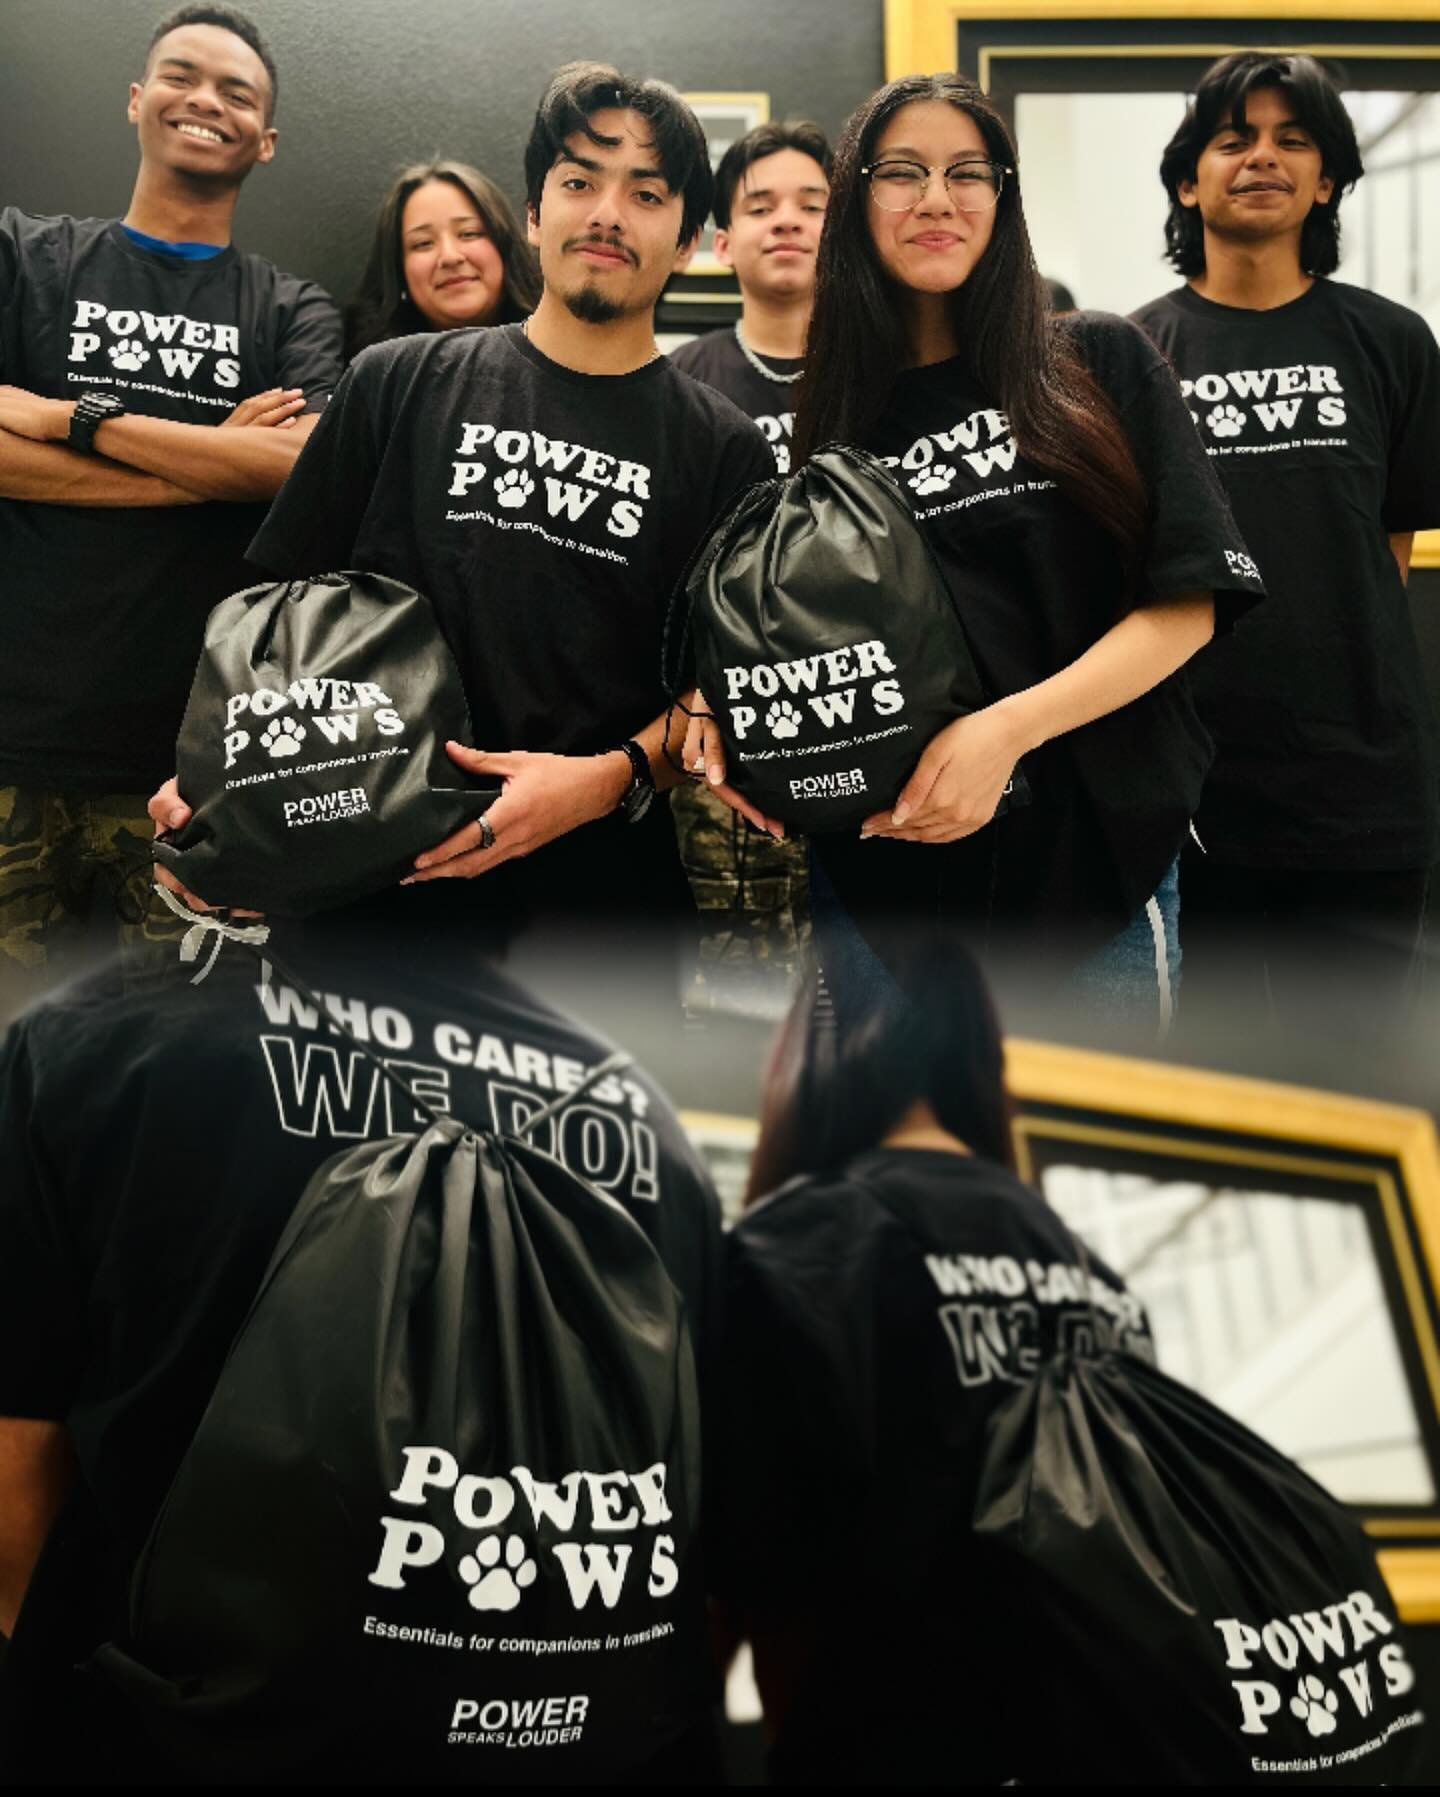 Power Paws&mdash;Essentials for companions in transition! 🐾 These amazing doggie essential packages were designed and crafted by Vista Del Lago&rsquo;s &ldquo;Top Dogs&rdquo; team as part of their Service Learning project. With their collected donat